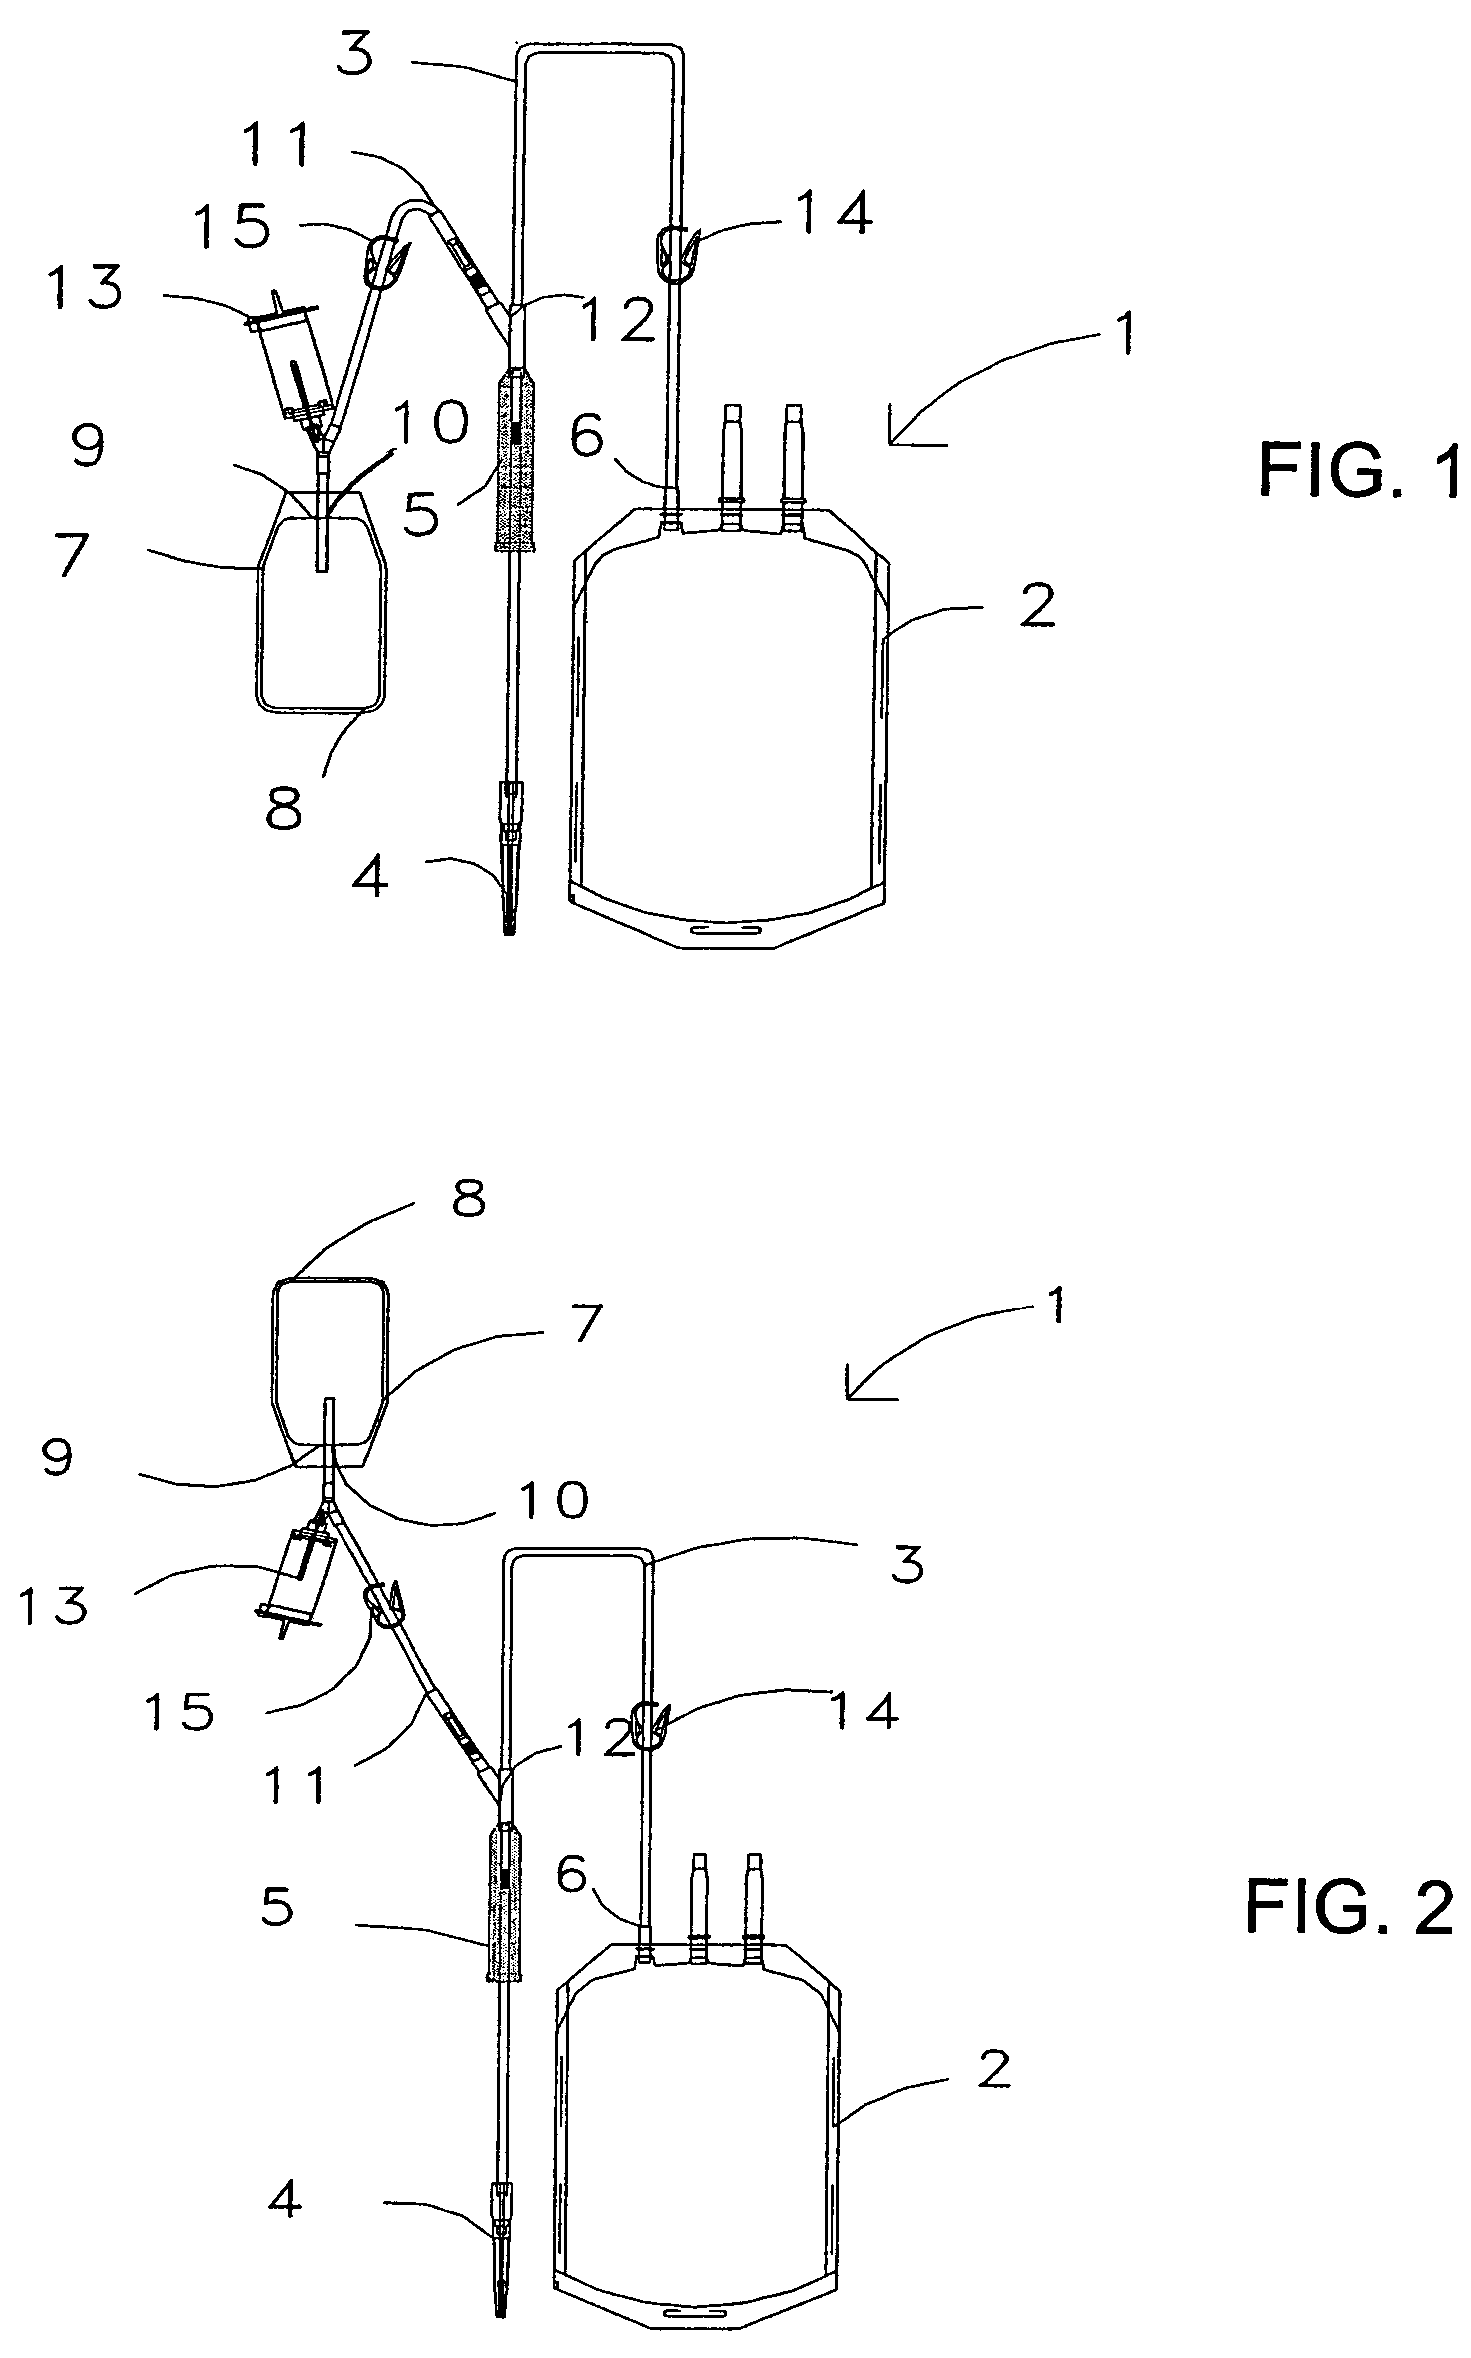 Bag system for collecting and sampling a biological fluid